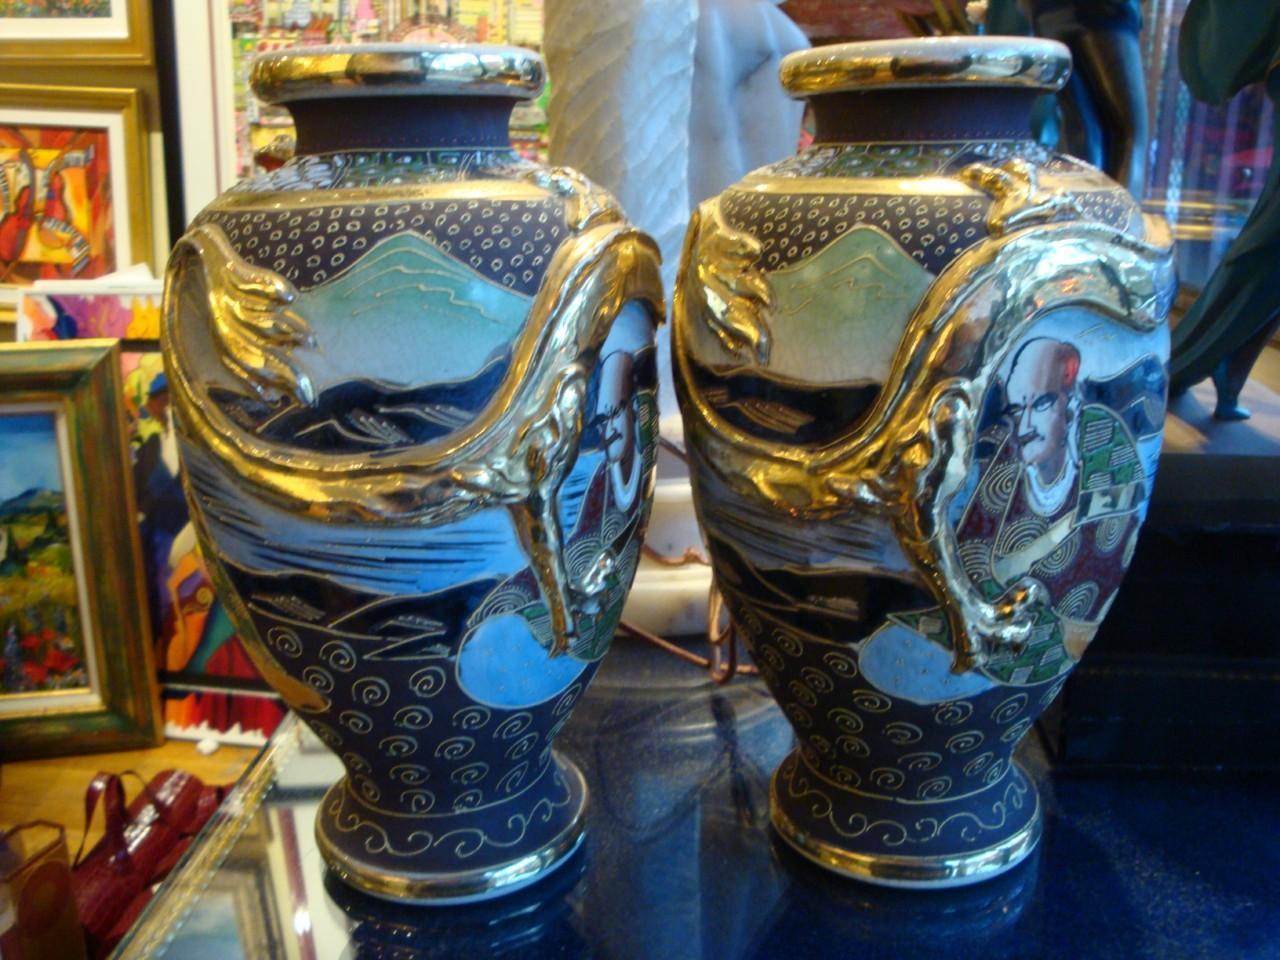 A BEAUTIFUL PAIR OF ANTIQUE HANDPAINTED SATSUMA POTTERY VASES. EACH BALUSTER WITH GILT AND ENAMEL PORTRAITS IN A LANDSCAPE DECORATION ON  A JEWELED BROWN GROUND WITH FIRED GOLD DRAGONS IN RELIEF & EMBOSSED , CIRCA 1910

PROVENANCE: TAKEN OUT OF AN